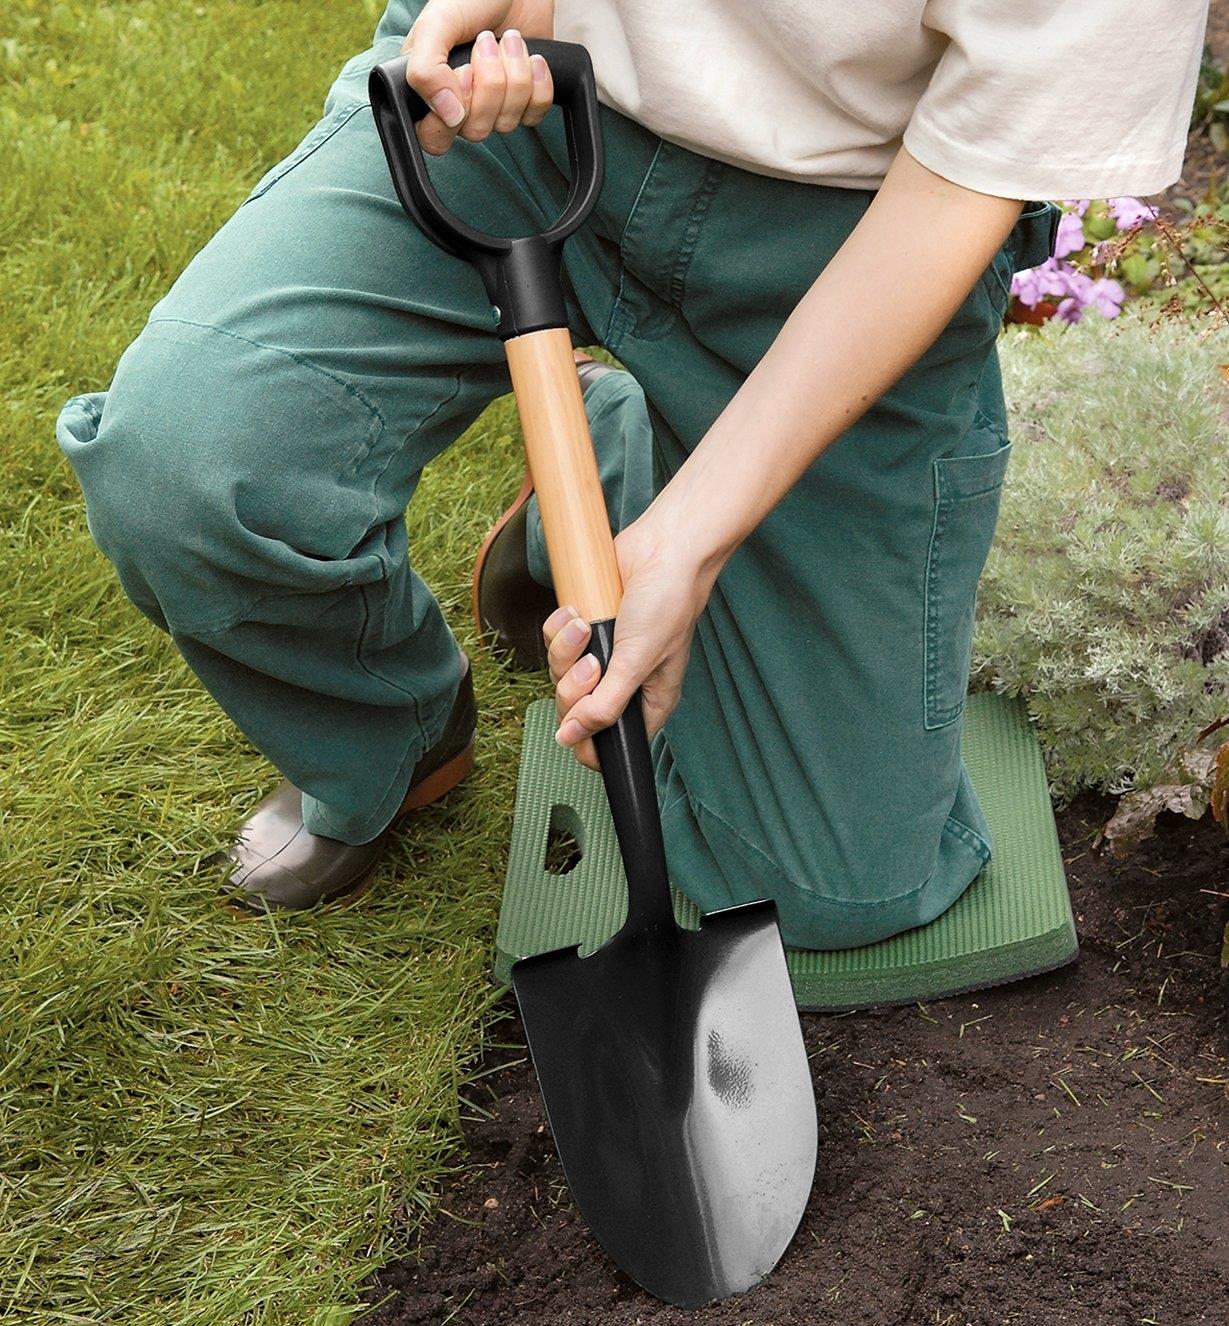 Using the Mini Shovel to dig in a planting bed